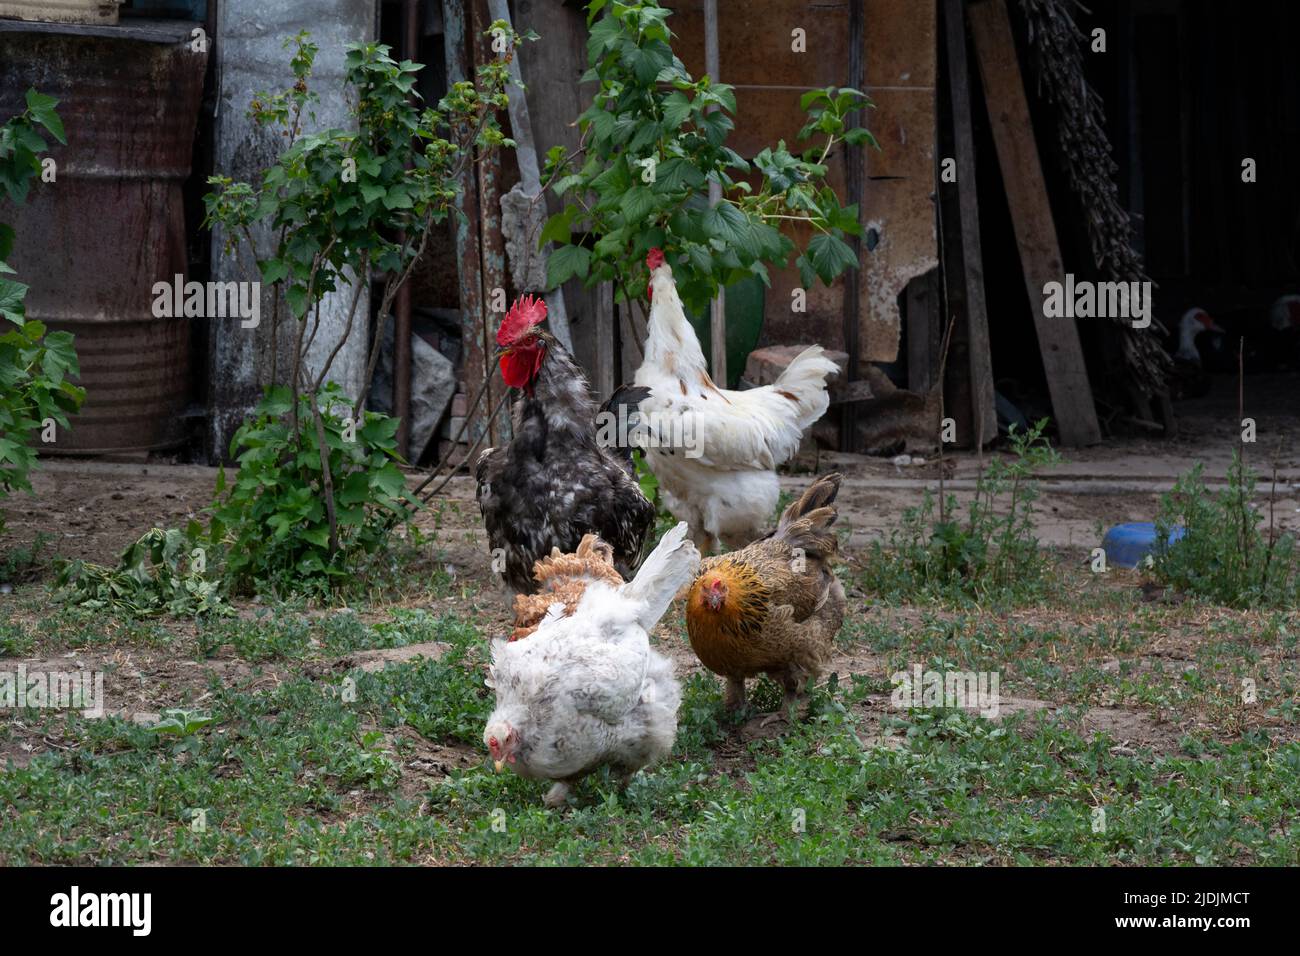 Roosters and hens are free range. Rooster and chickens grazing on the grass on backyard Stock Photo